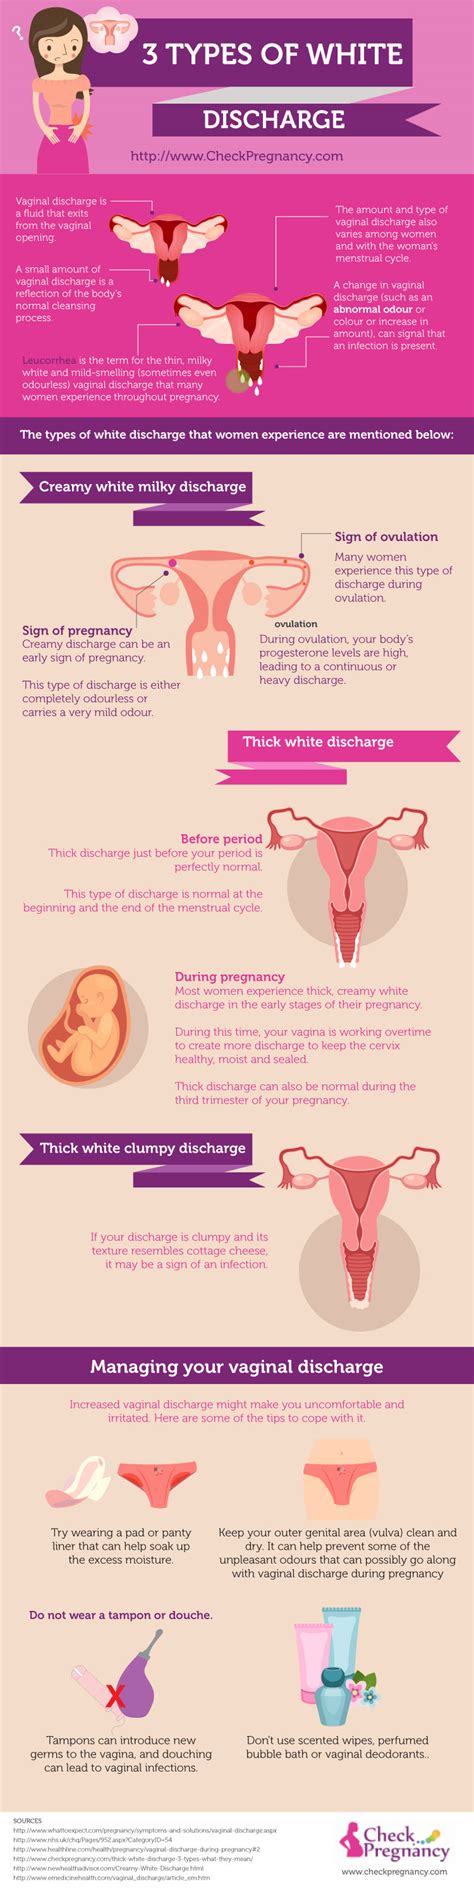 thick white vaginal discharge 3 types and what they mean [infographic]